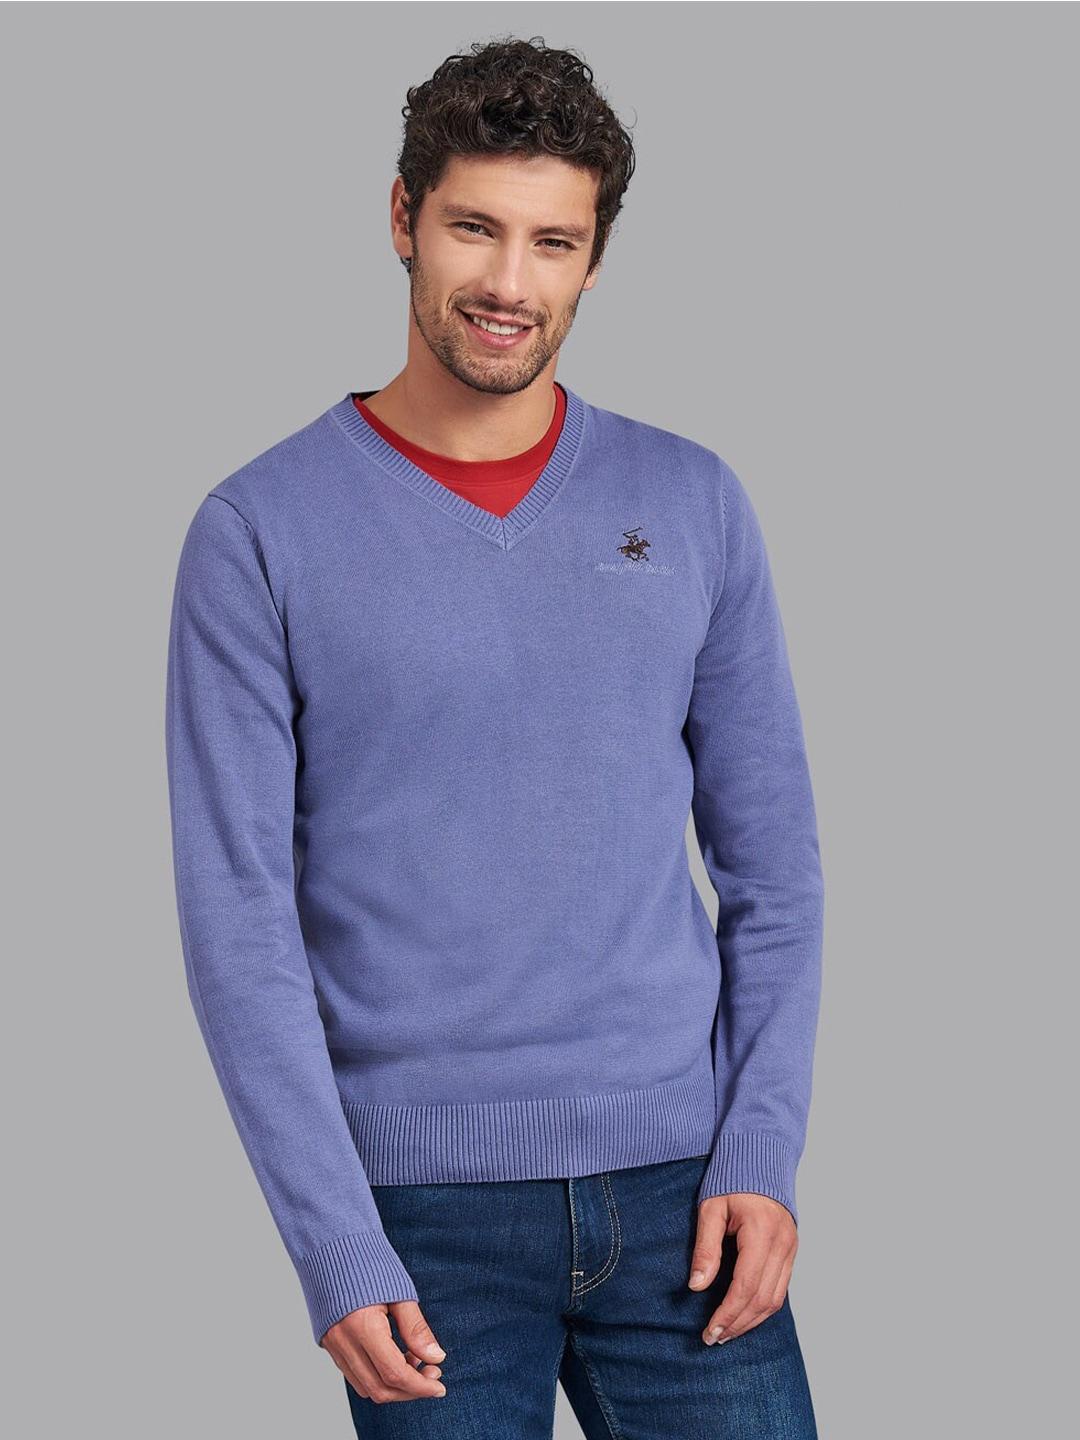 beverly-hills-polo-club-men-purple-solid-pullover